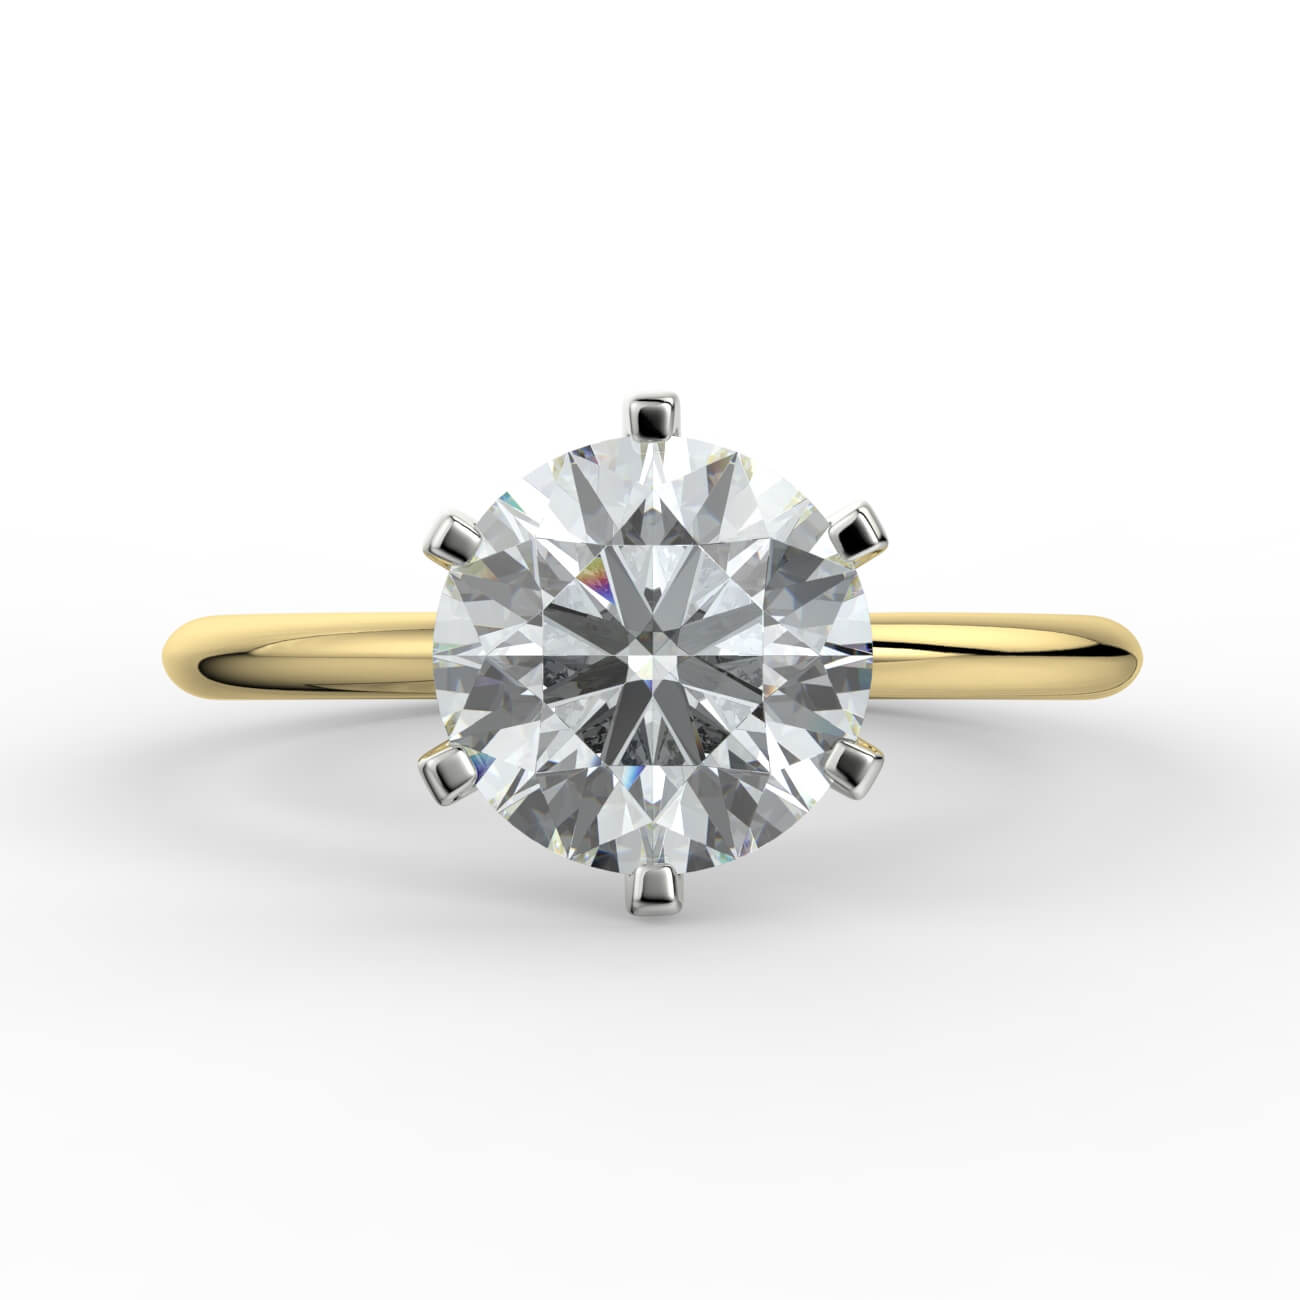 Knife-edge solitaire diamond engagement ring in white and yellow gold – Australian Diamond Network